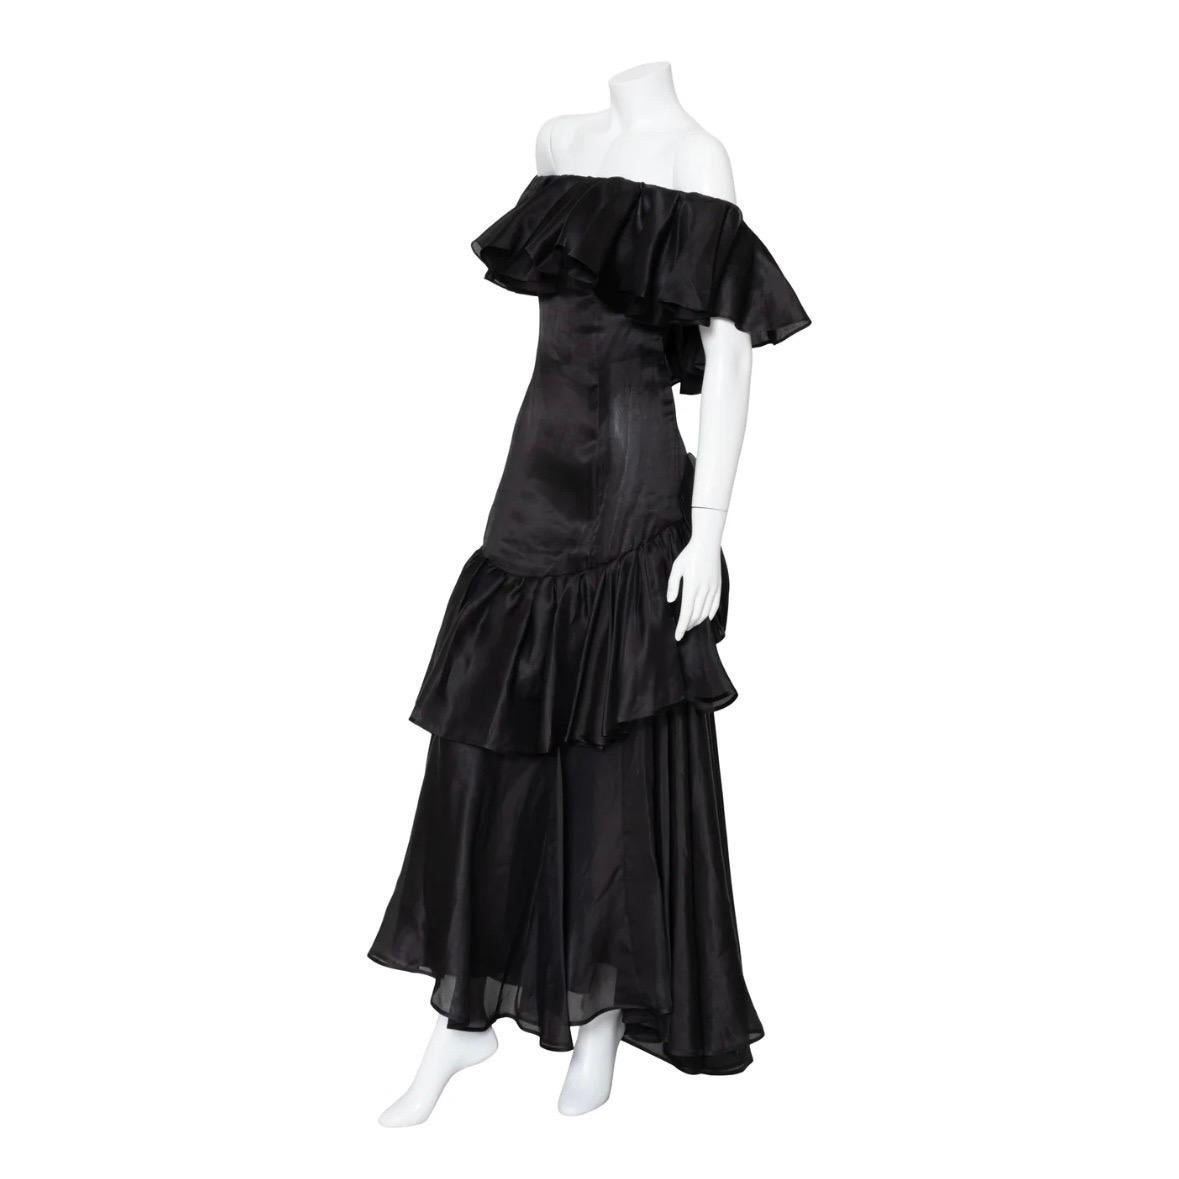 Yves Saint Laurent Haute Couture Ruffled Gown (1980s) In Good Condition For Sale In Los Angeles, CA